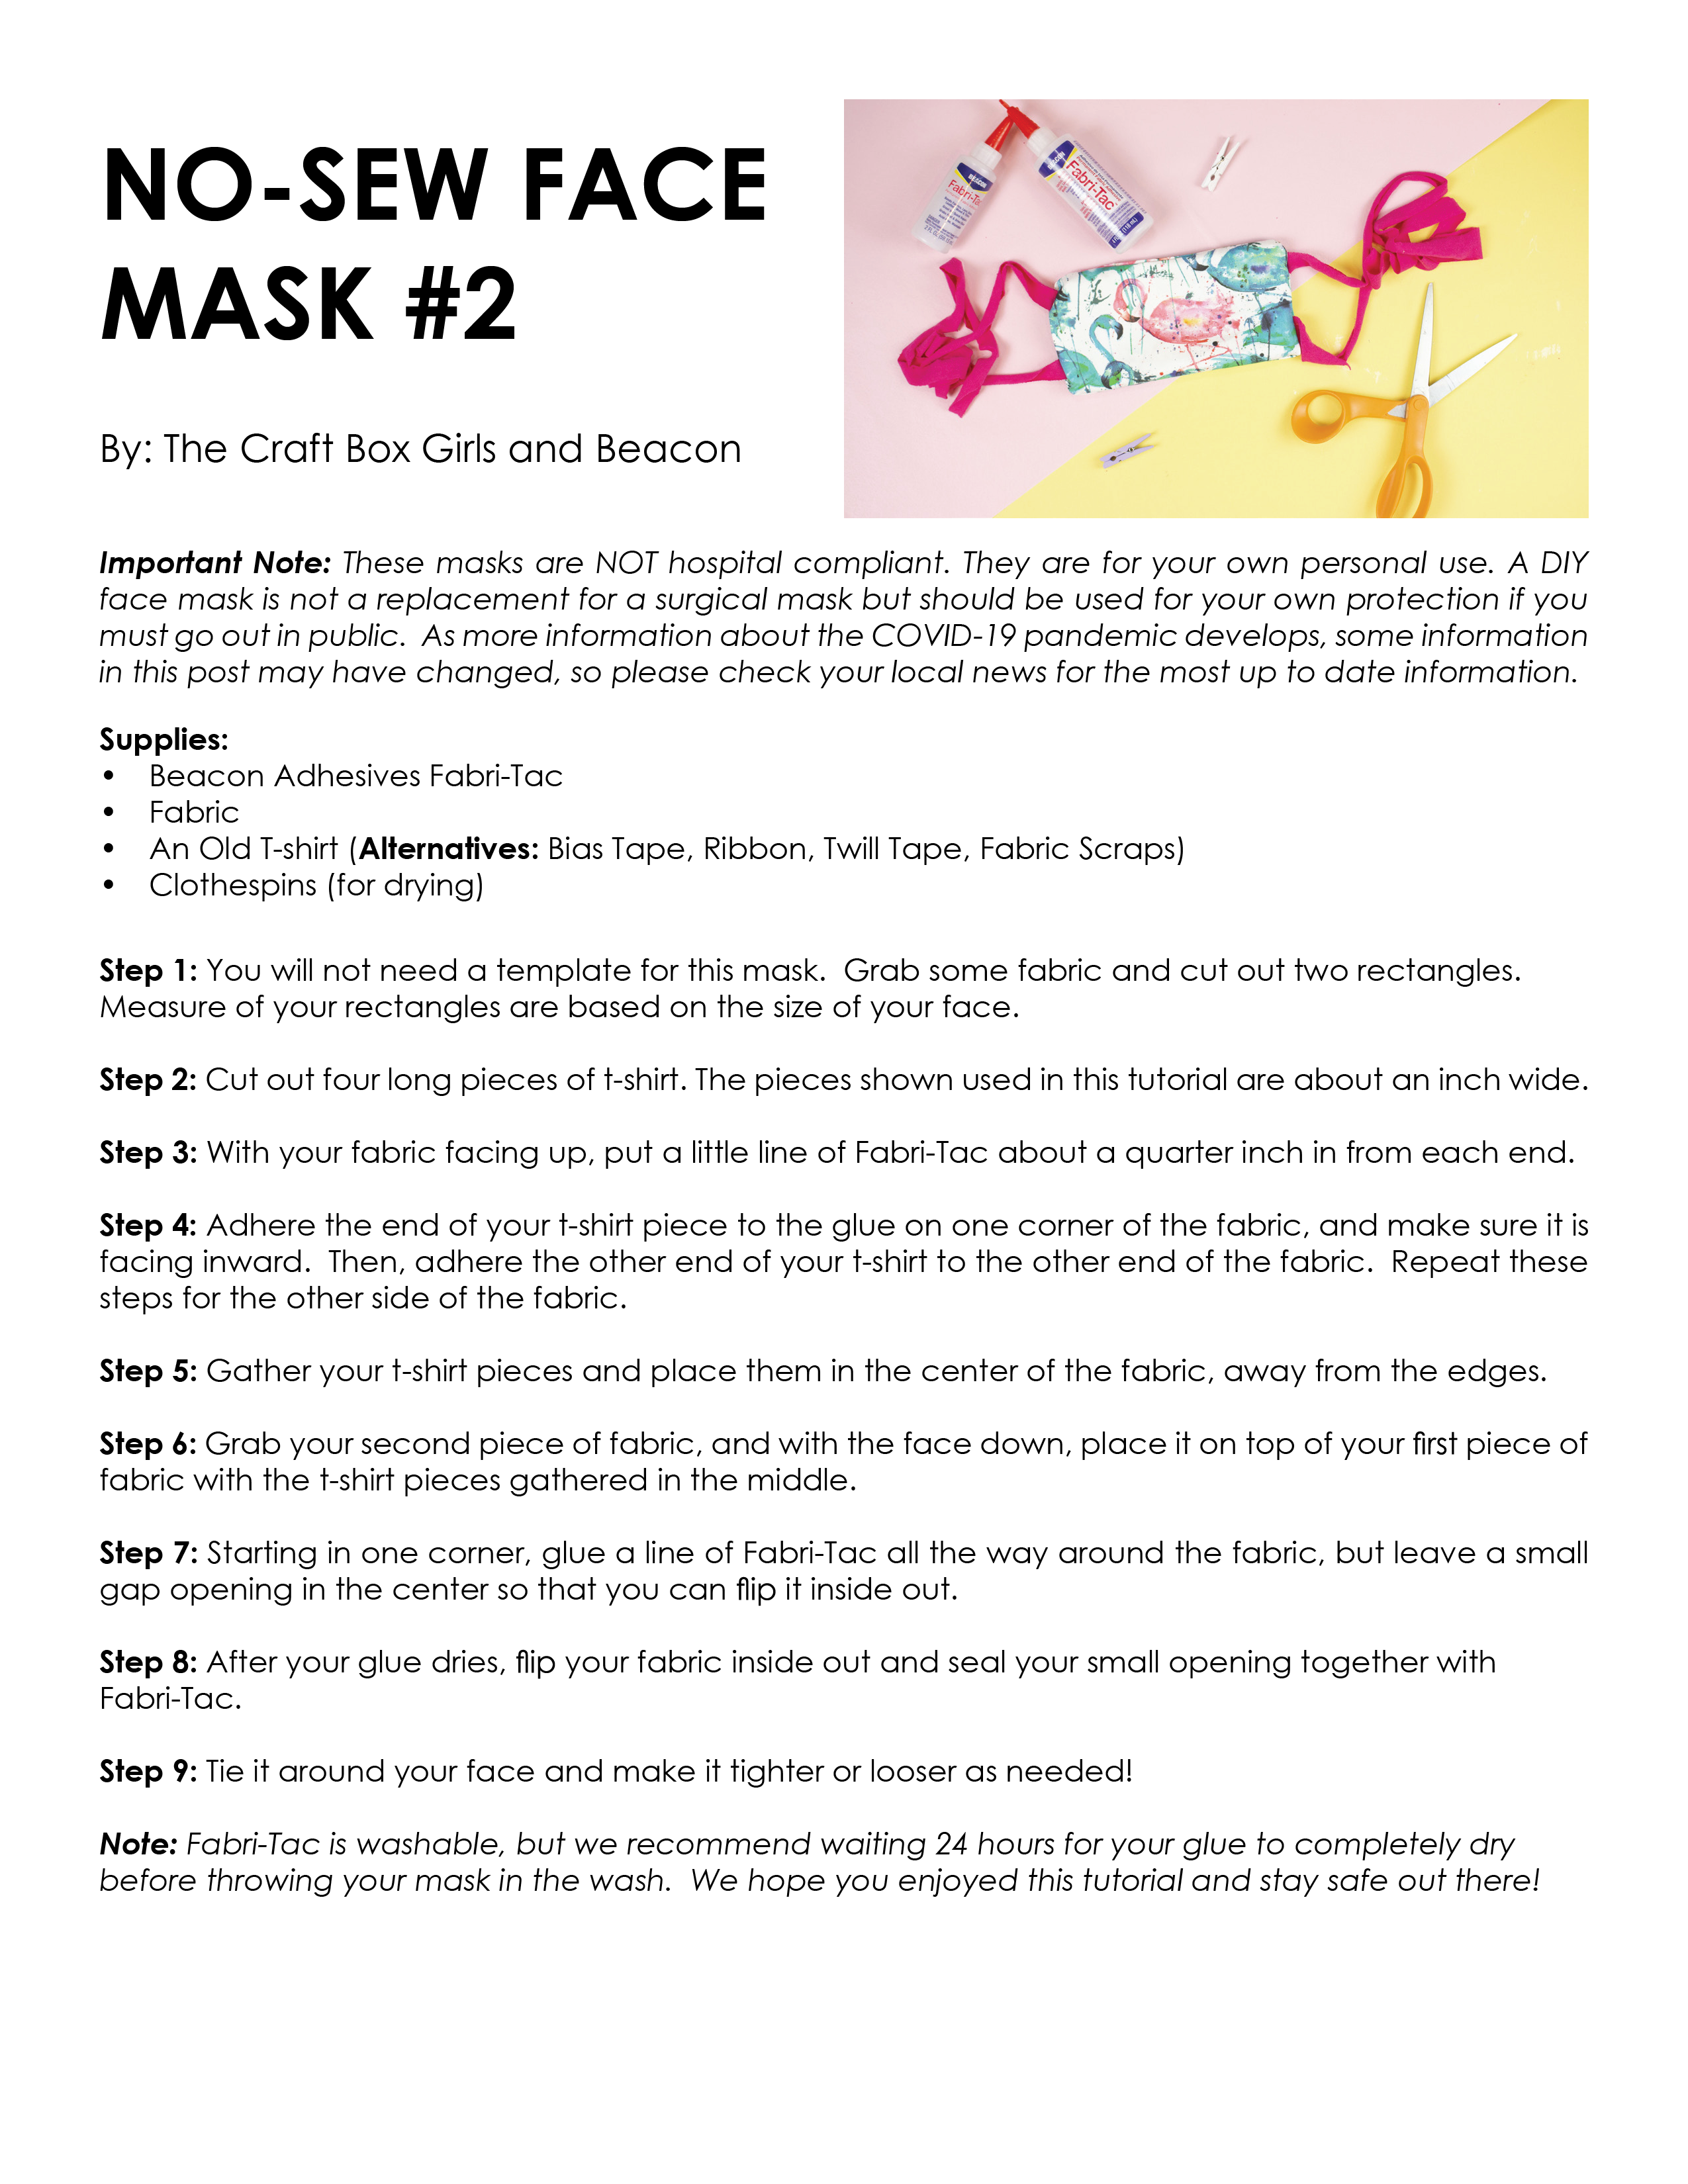 Steps to create your face mask